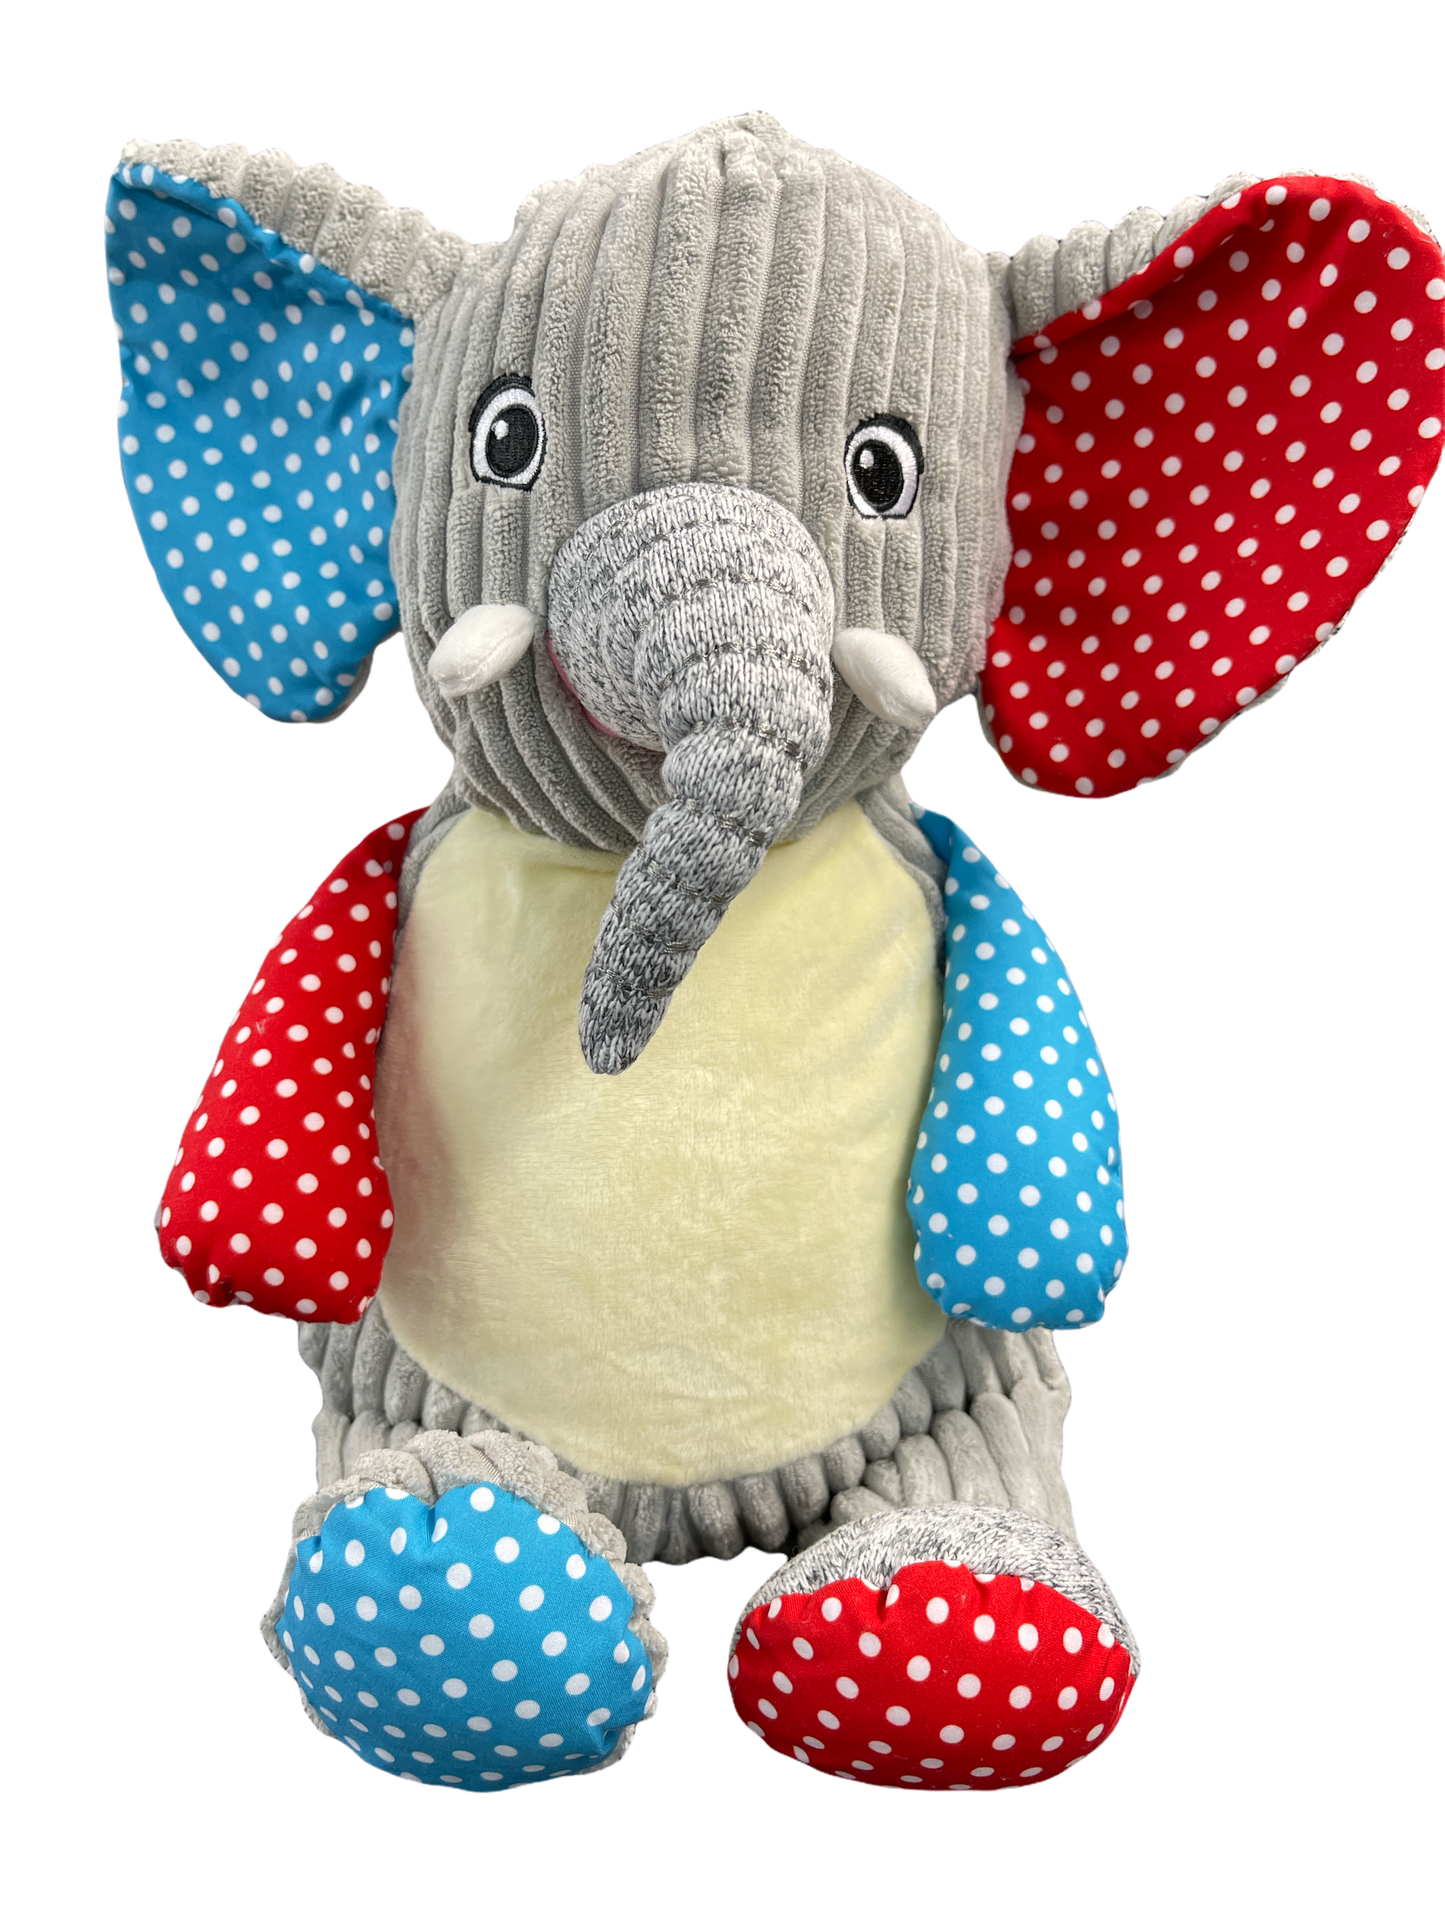 Embroidered Stuffed Patchwork Harlequinn Printed Elephant Animal Cubbie Personalized Baby Gift